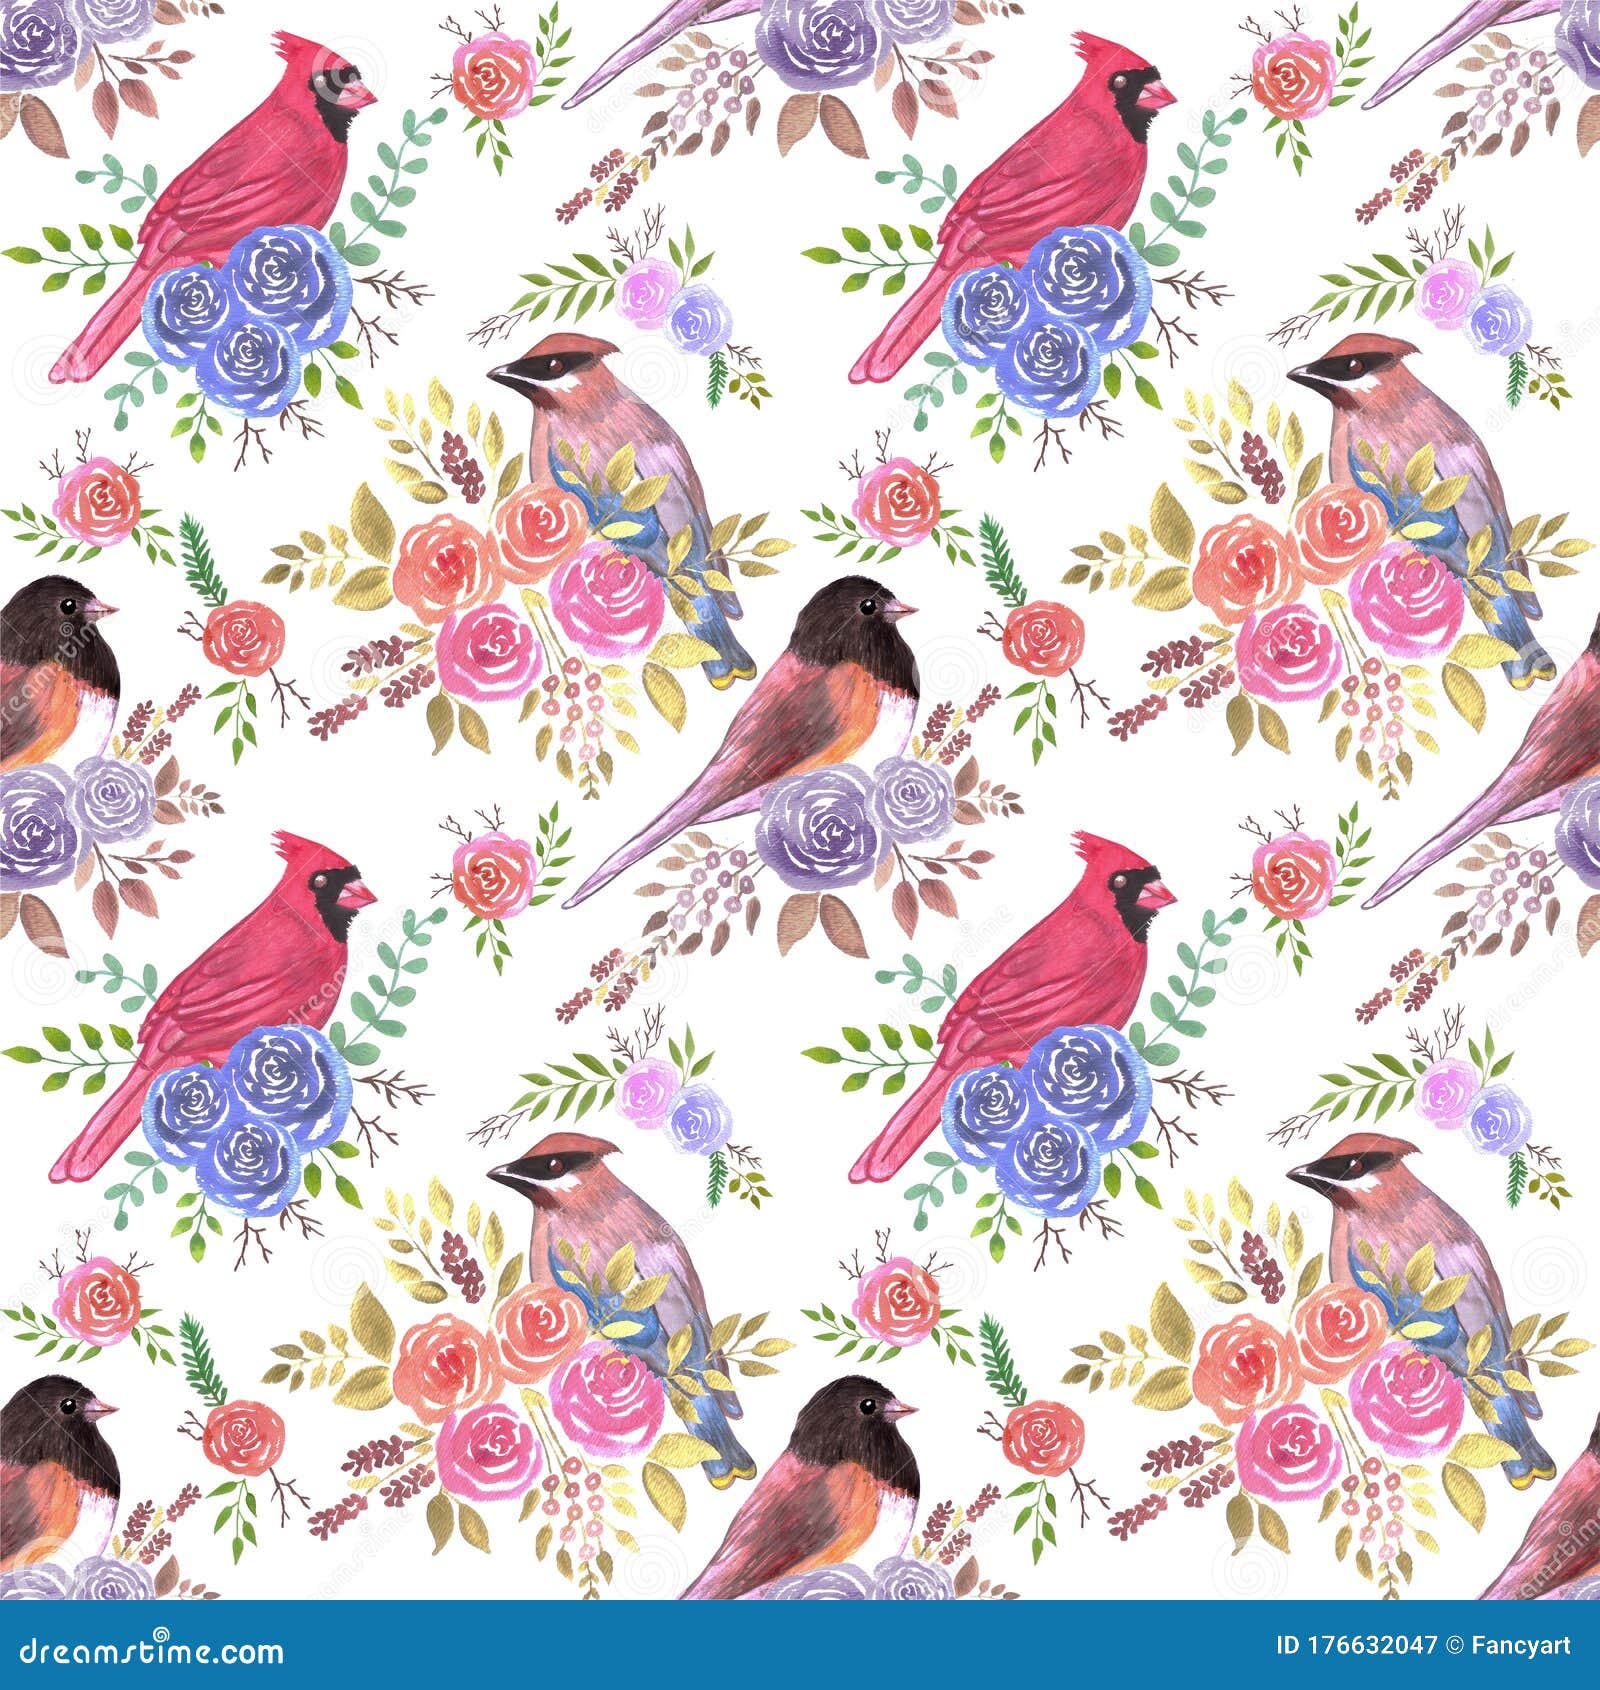 cardinals juncos and waxwings on rose blossoms- seamless birds watercolor background